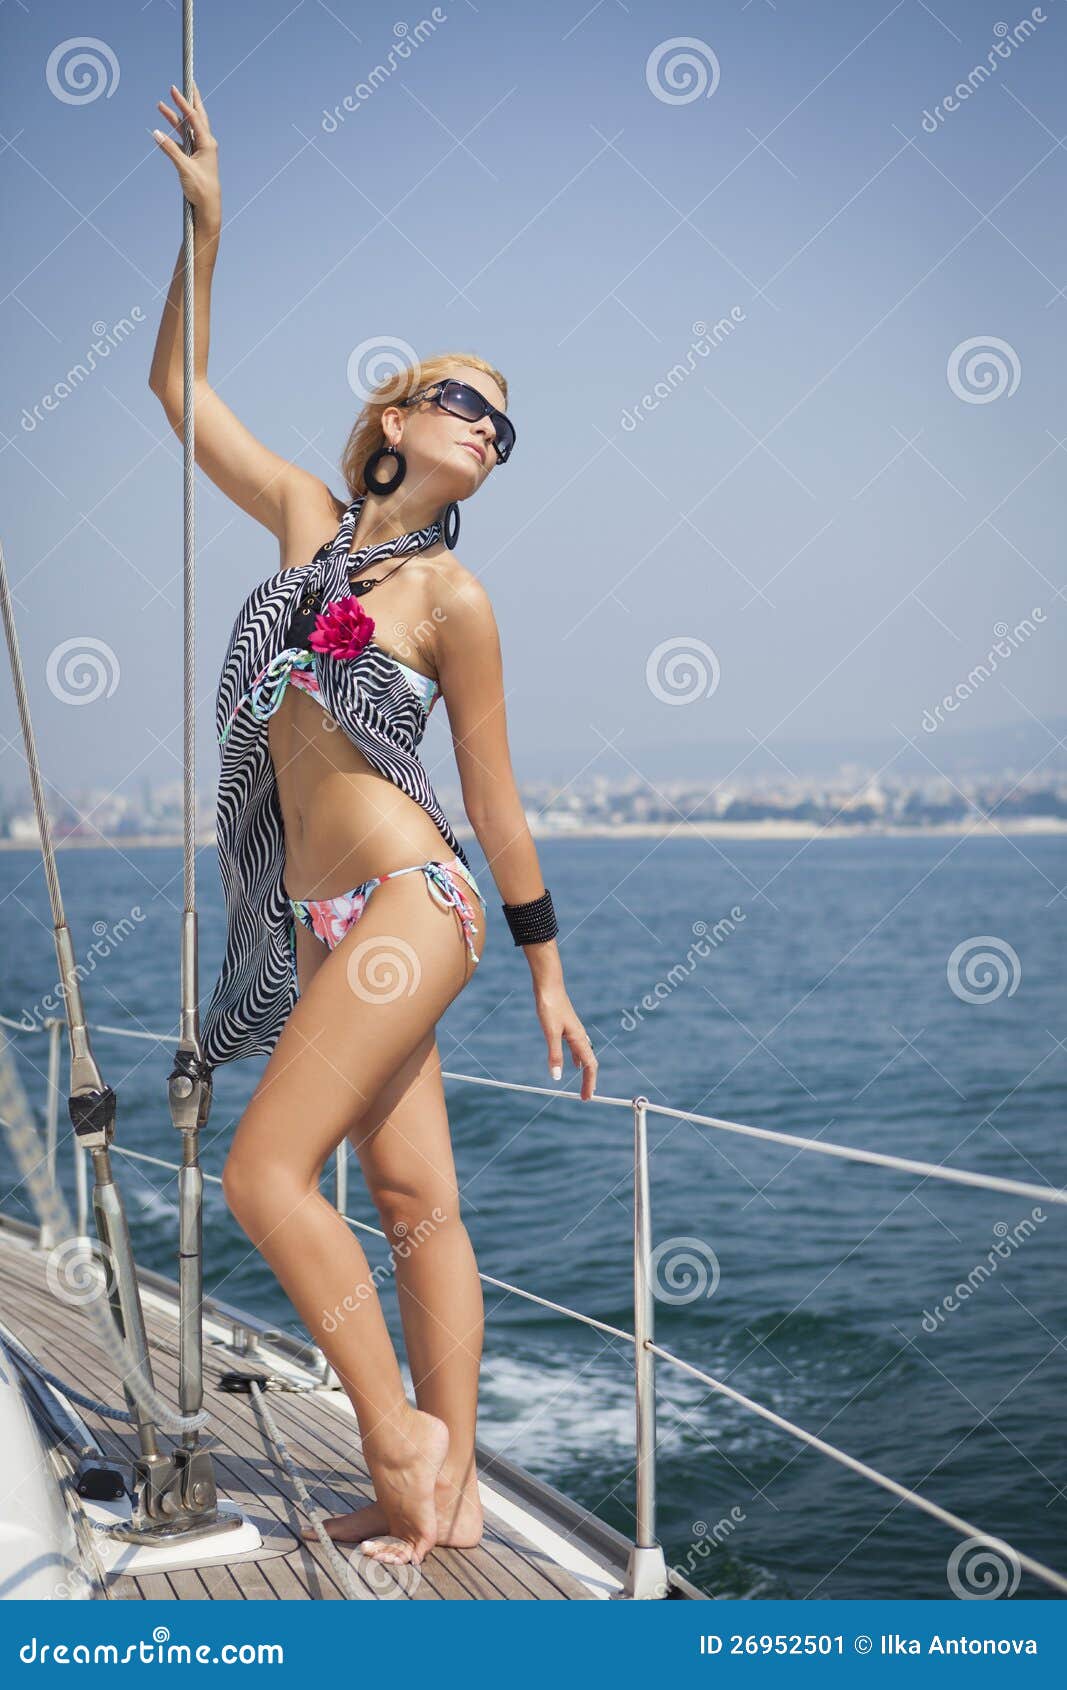 Young Woman Sailing On Yacht Stock Image - Image of 